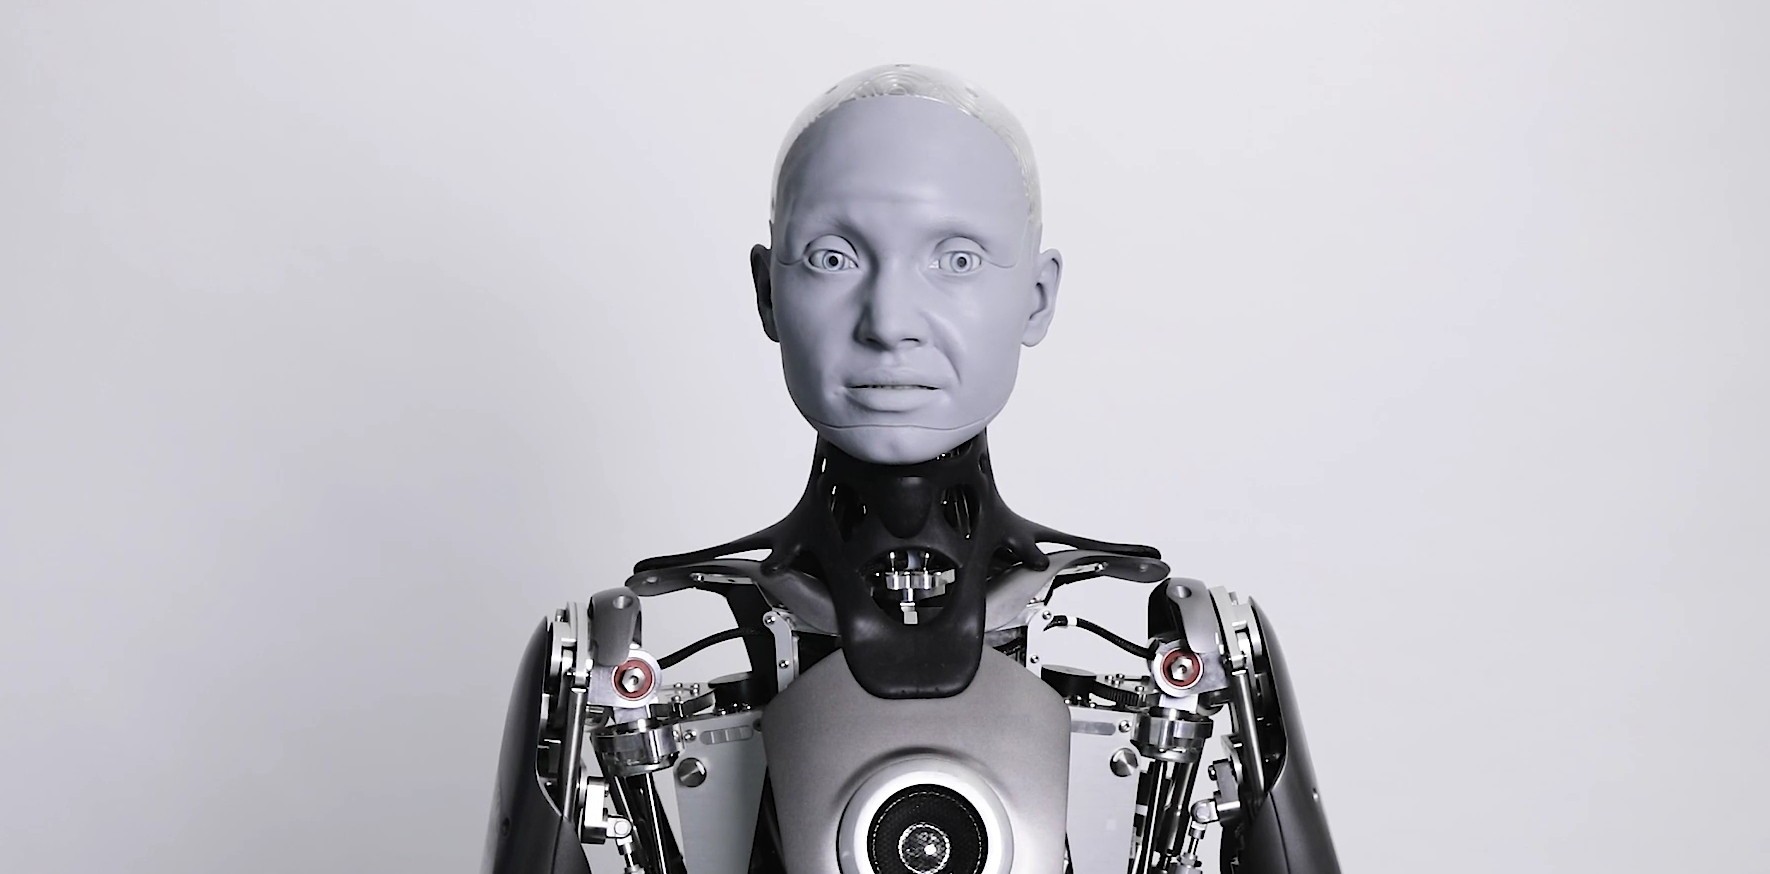 Meet Ameca, the Humanoid Robot With Eerily Realistic Facial Expressions - autoevolution